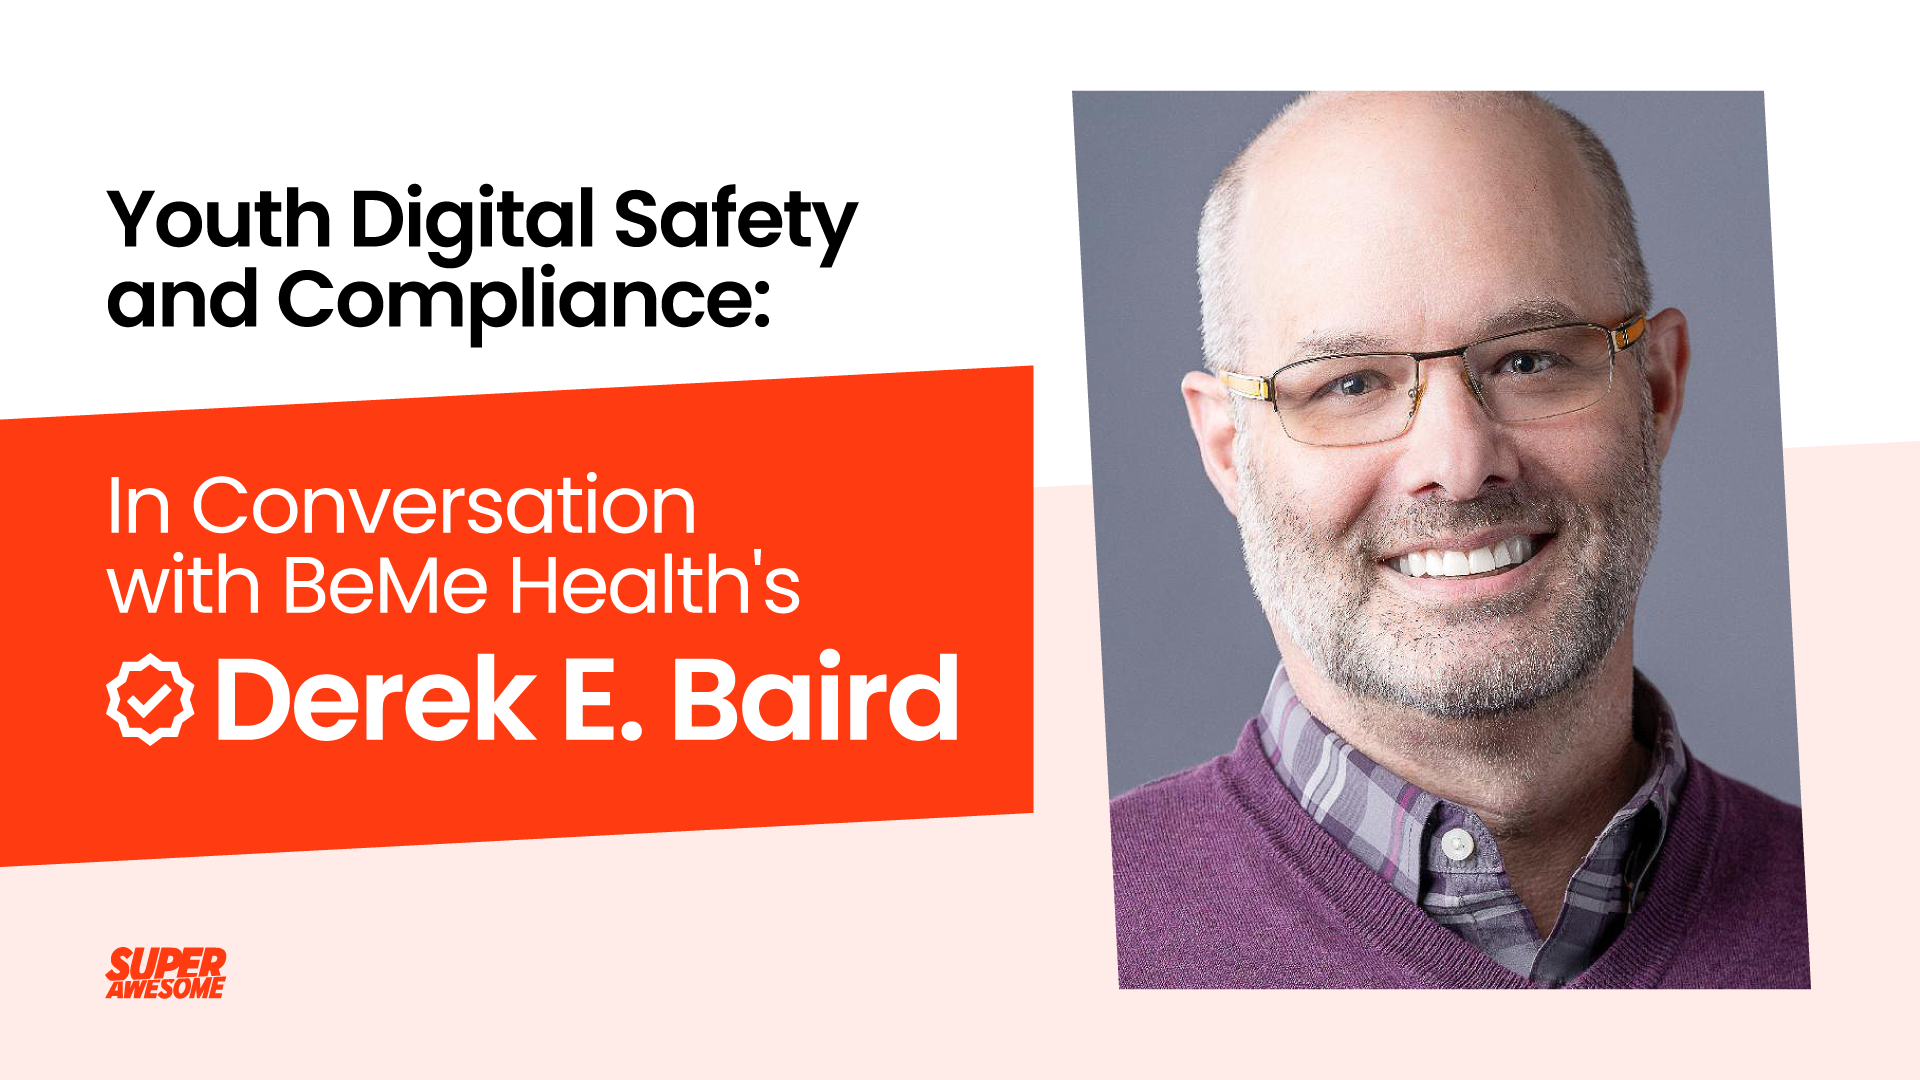 Youth Digital Safety and Compliance: In Conversation with BeMe Health's Derek E. Baird